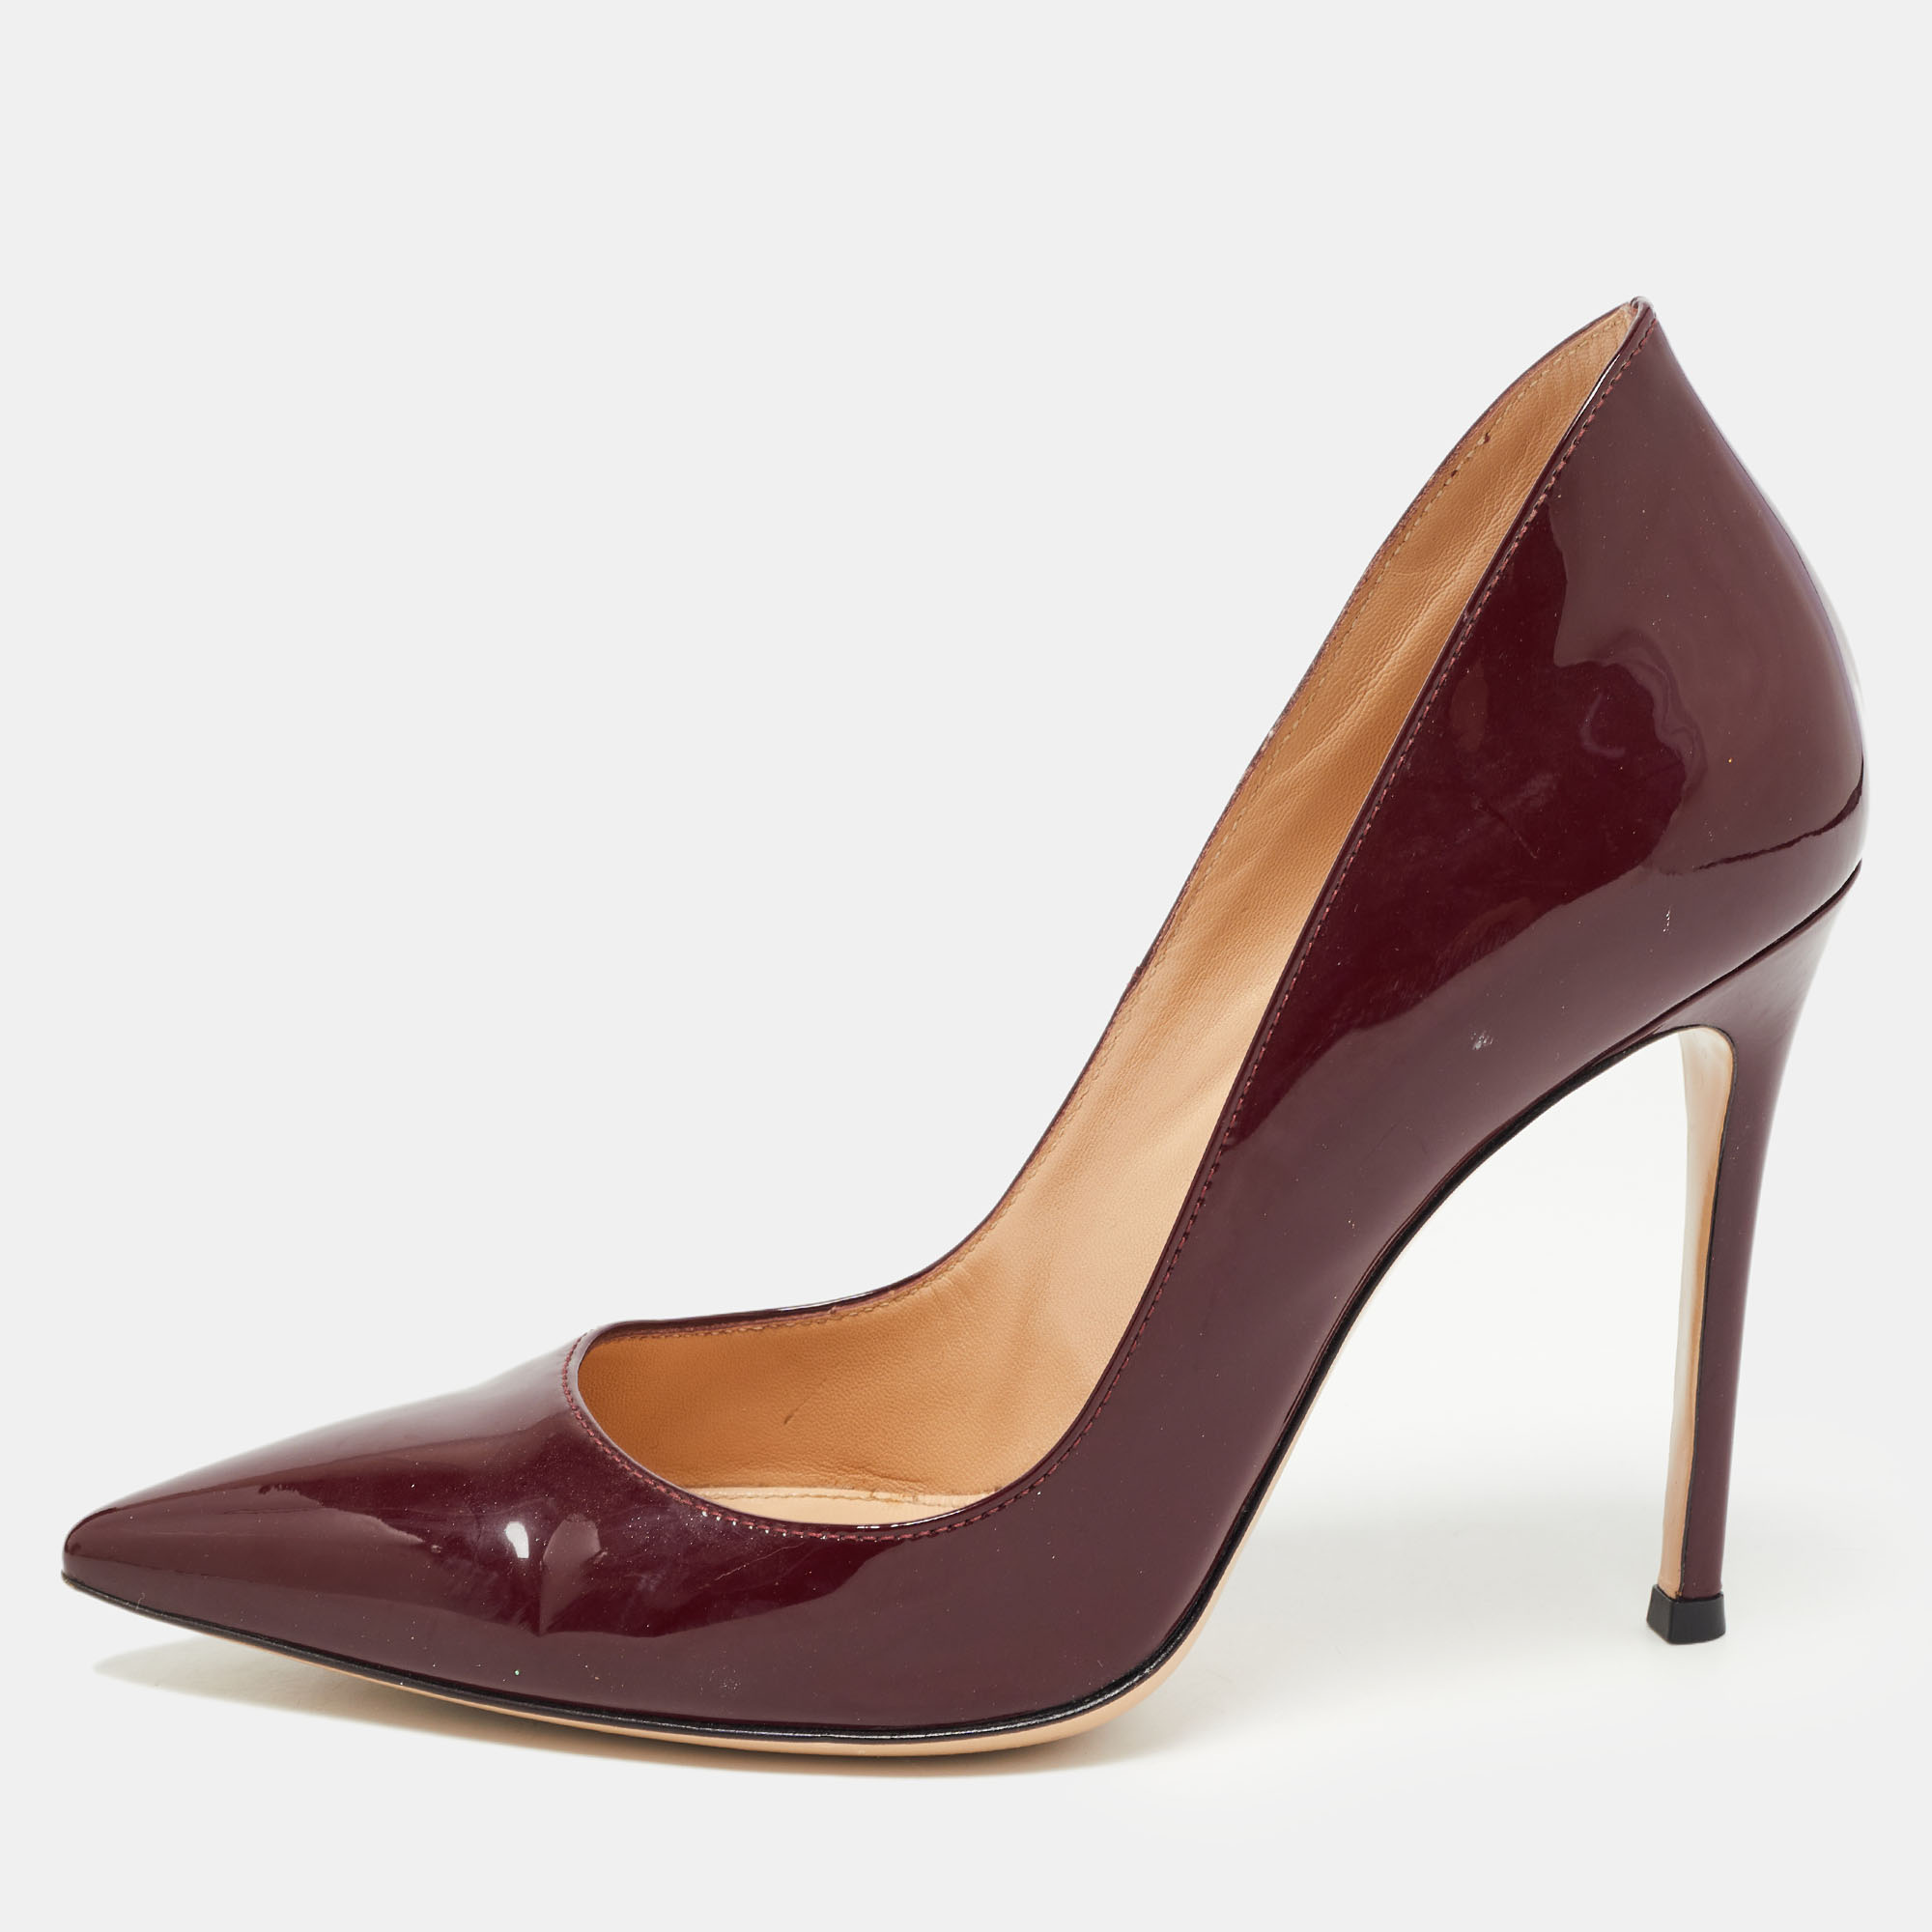 Pre-owned Gianvito Rossi Burgundy Patent Leather Pointed Toe Pumps Size 37.5